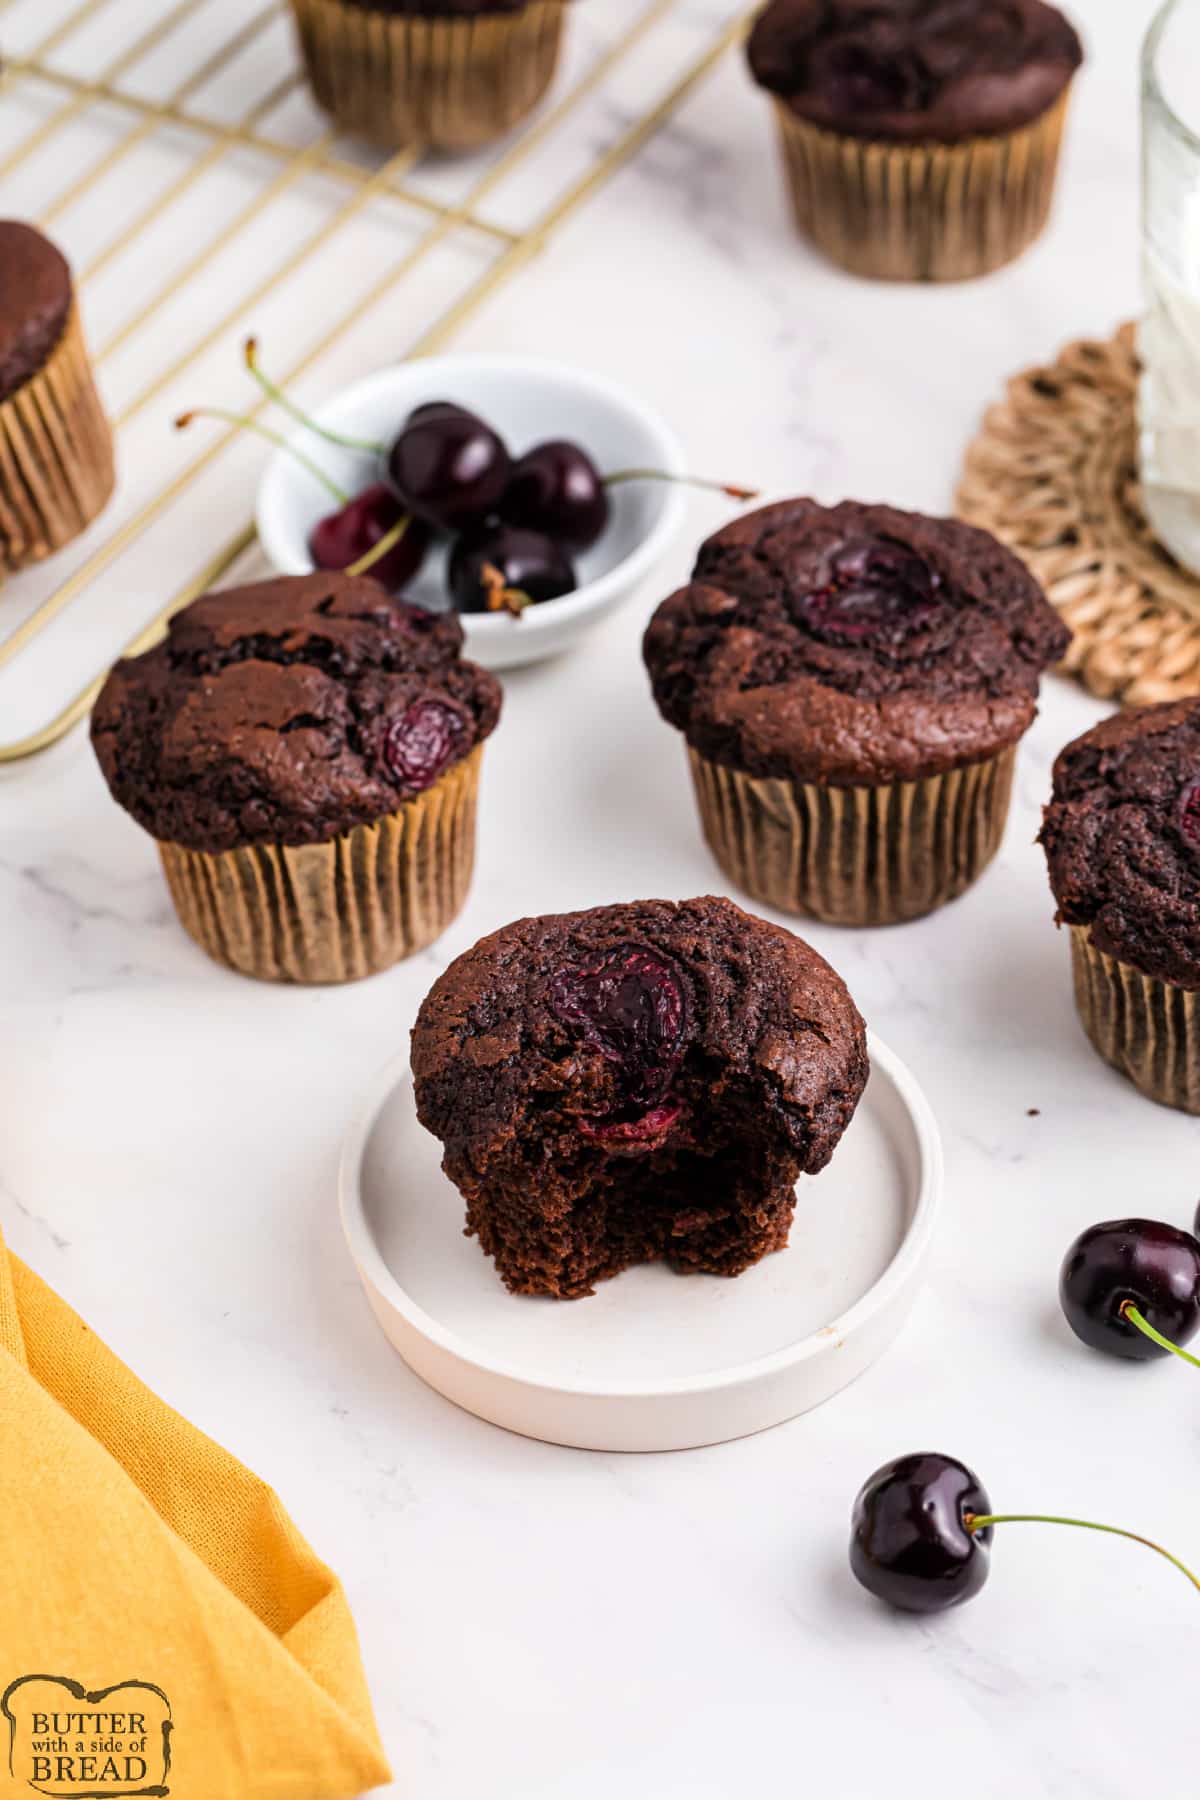 Cherry Chocolate Muffins are made with sweet and juicy fresh cherries. Deliciously moist bakery-style muffins that are perfect for breakfast or dessert!